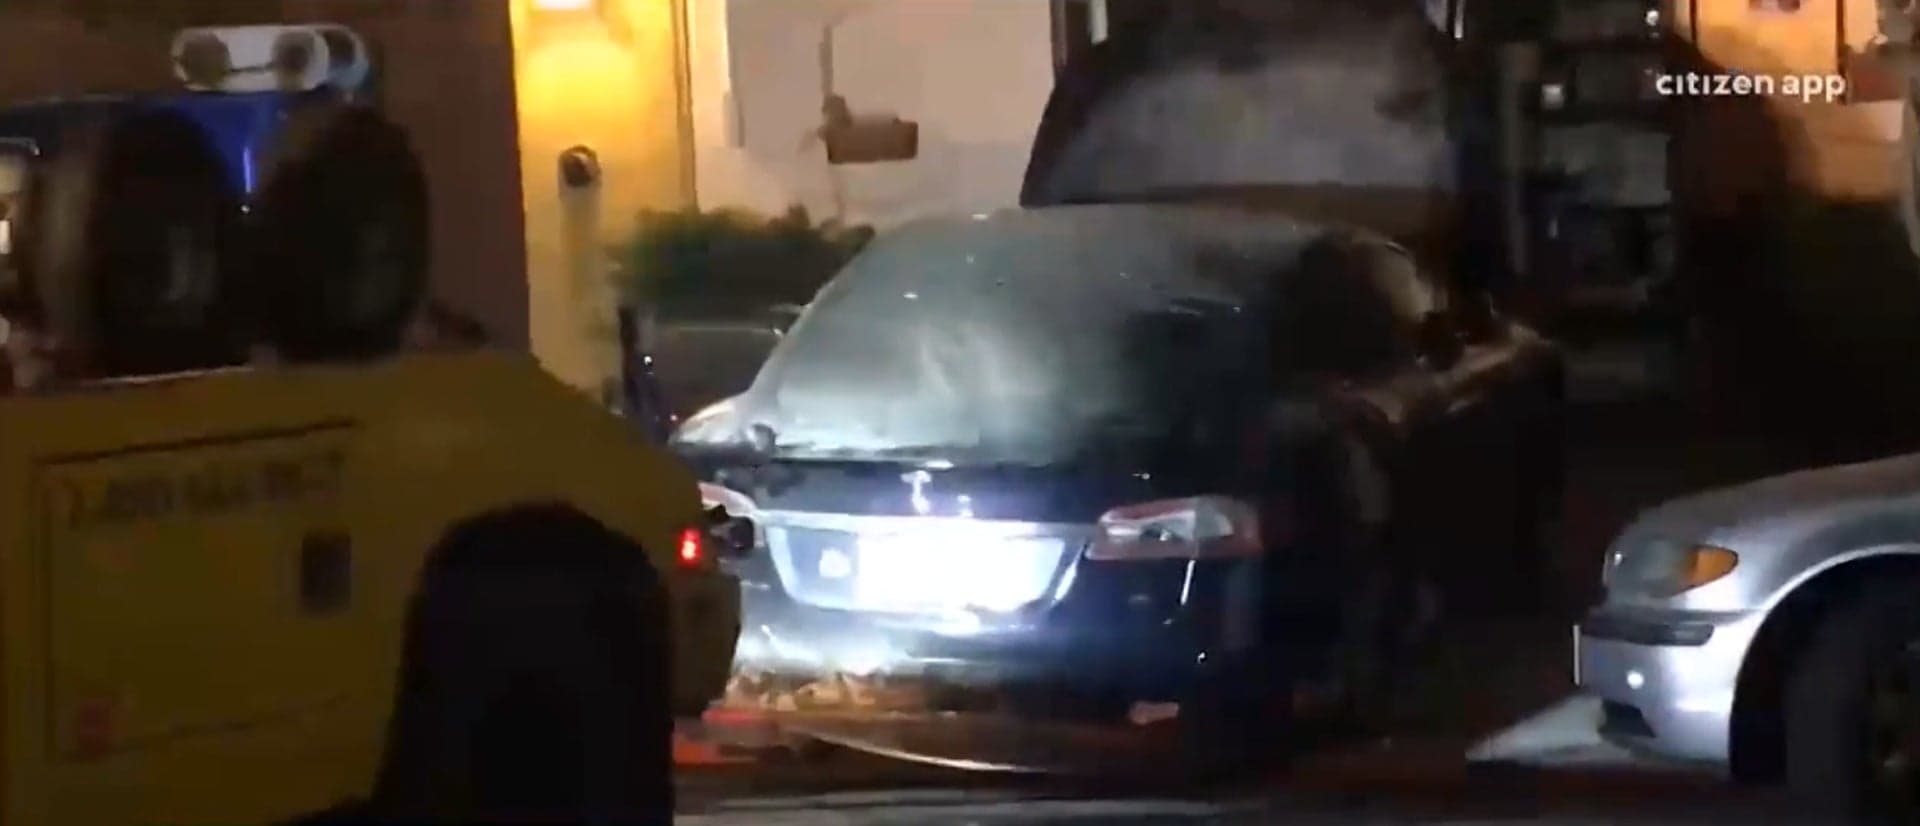 Another Tesla Model S Randomly Catches Fire in San Francisco Garage: Report